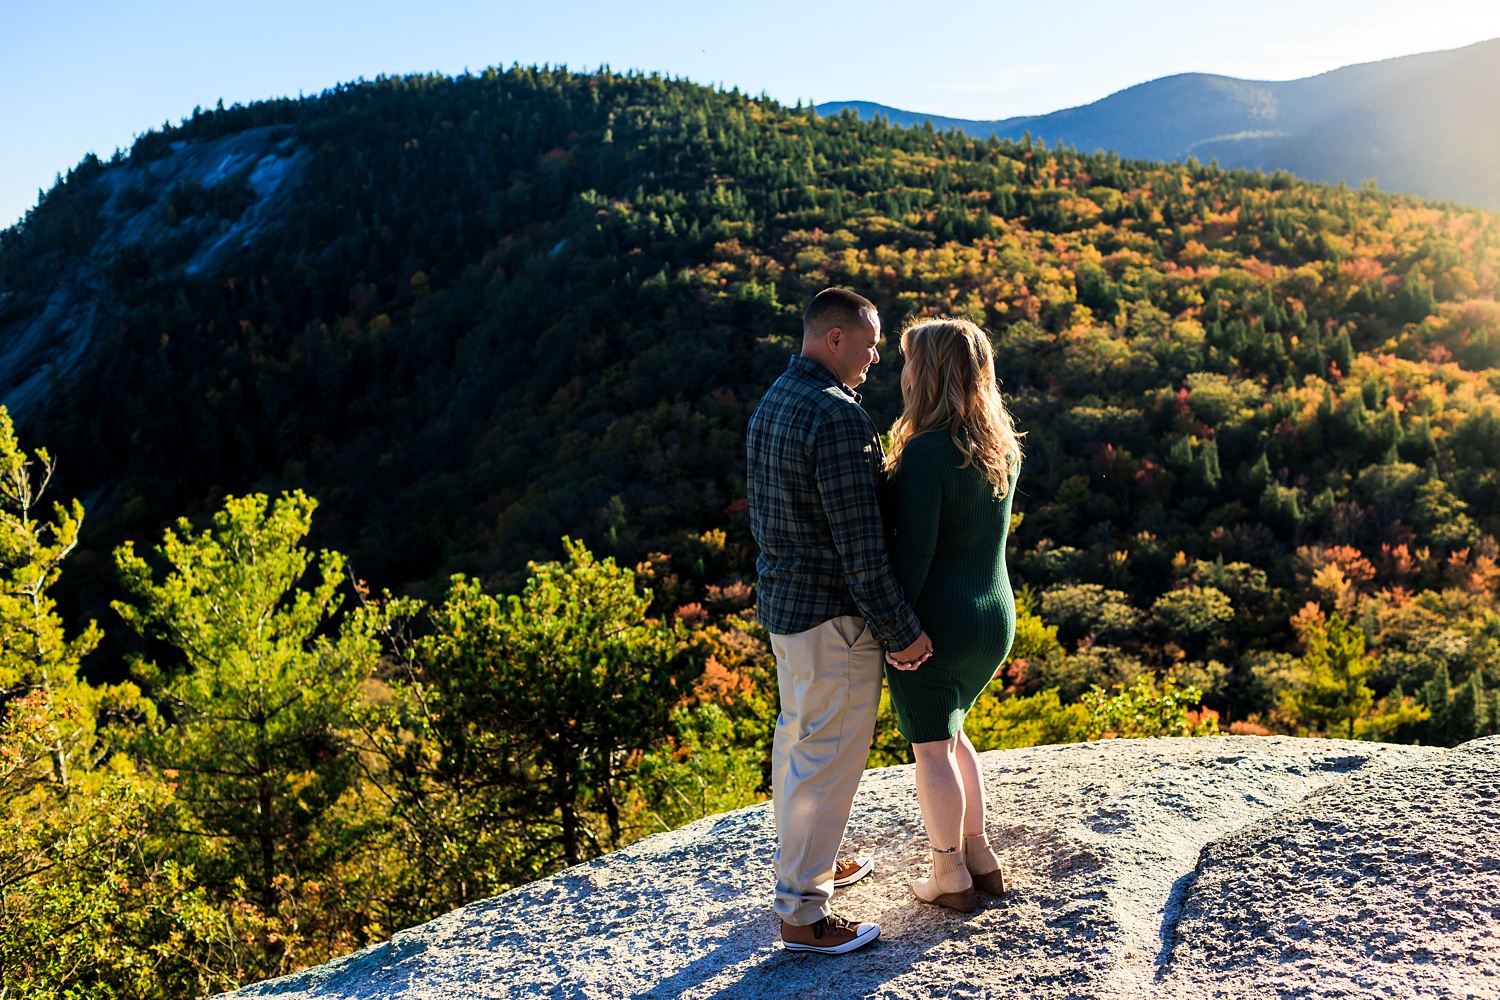 Looking out at the fall views up at Cathedral Ledge in the White Mountains of NH